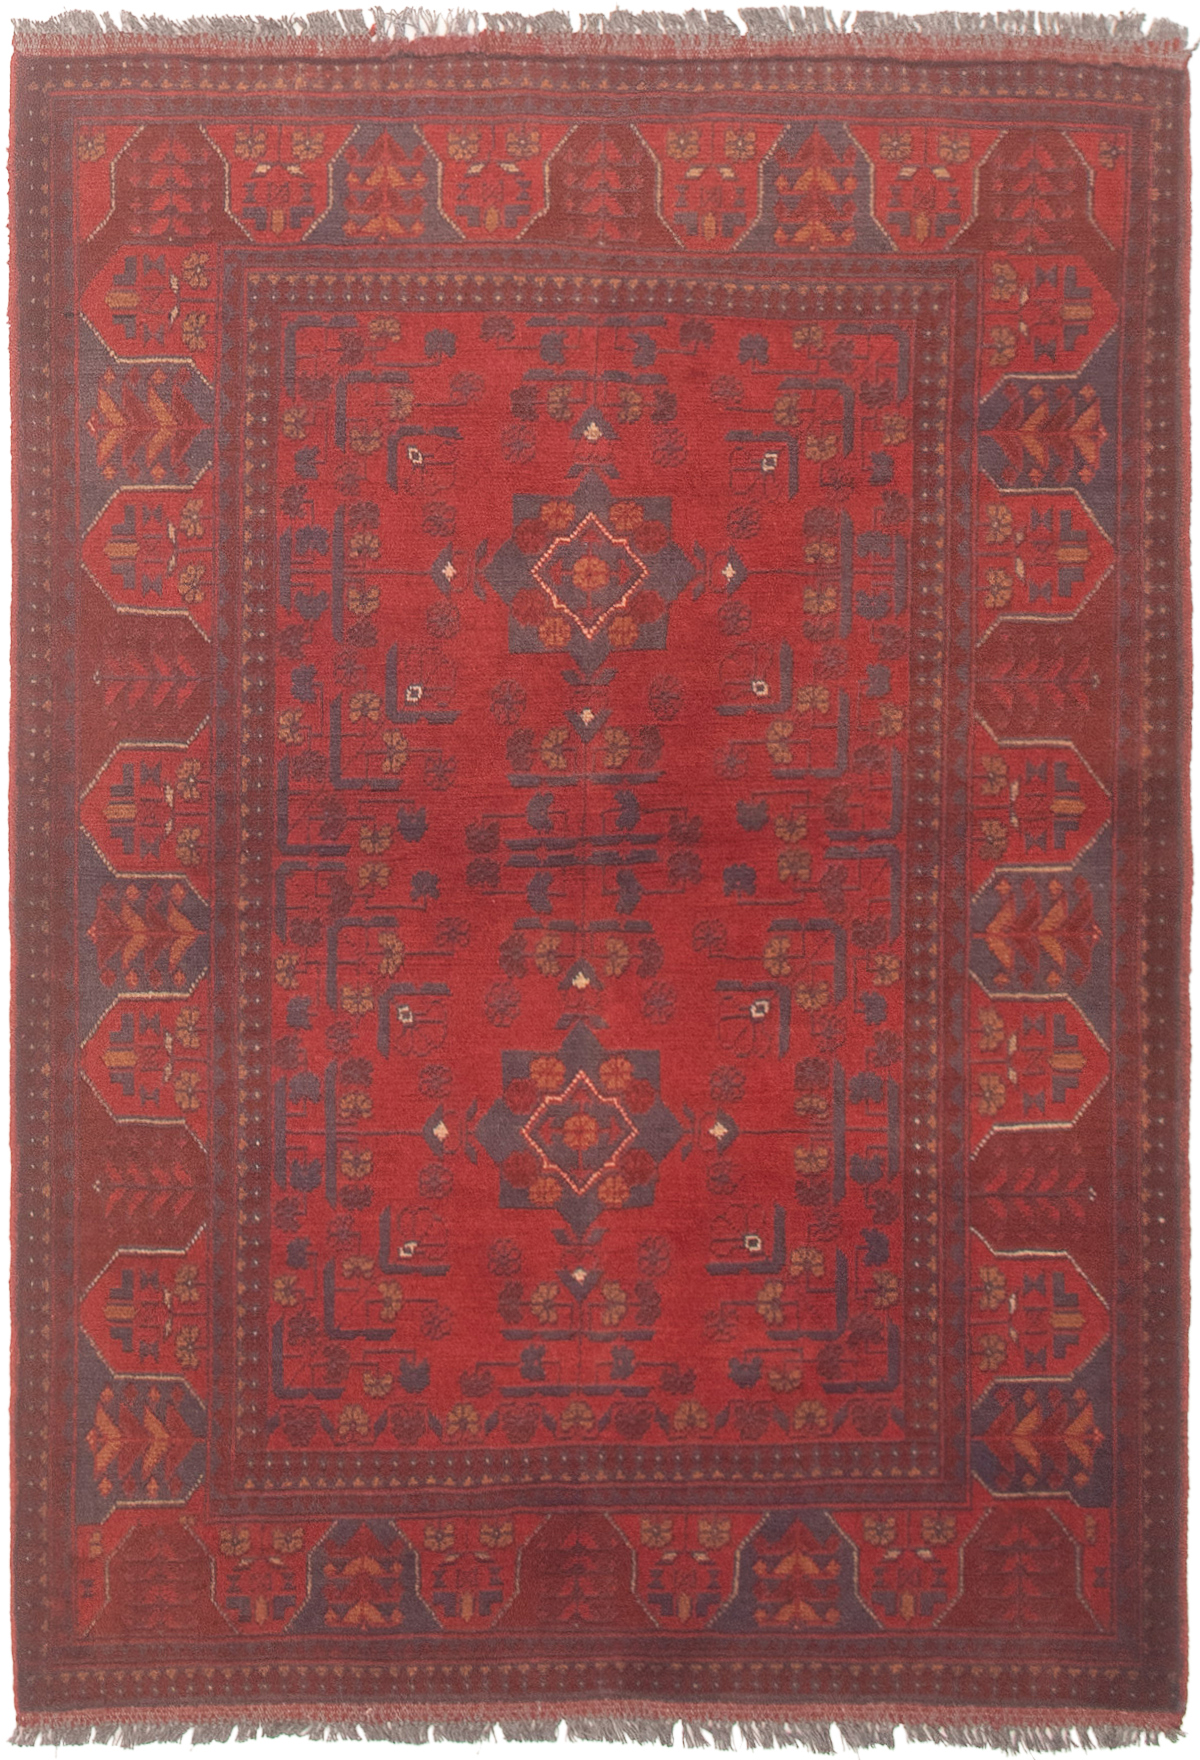 eCarpet Gallery Area Rug for Living Room Hand-Knotted Wool Rug 328796 Finest Khal Mohammadi Bordered Red Rug 5'7 x 7'9 Bedroom 